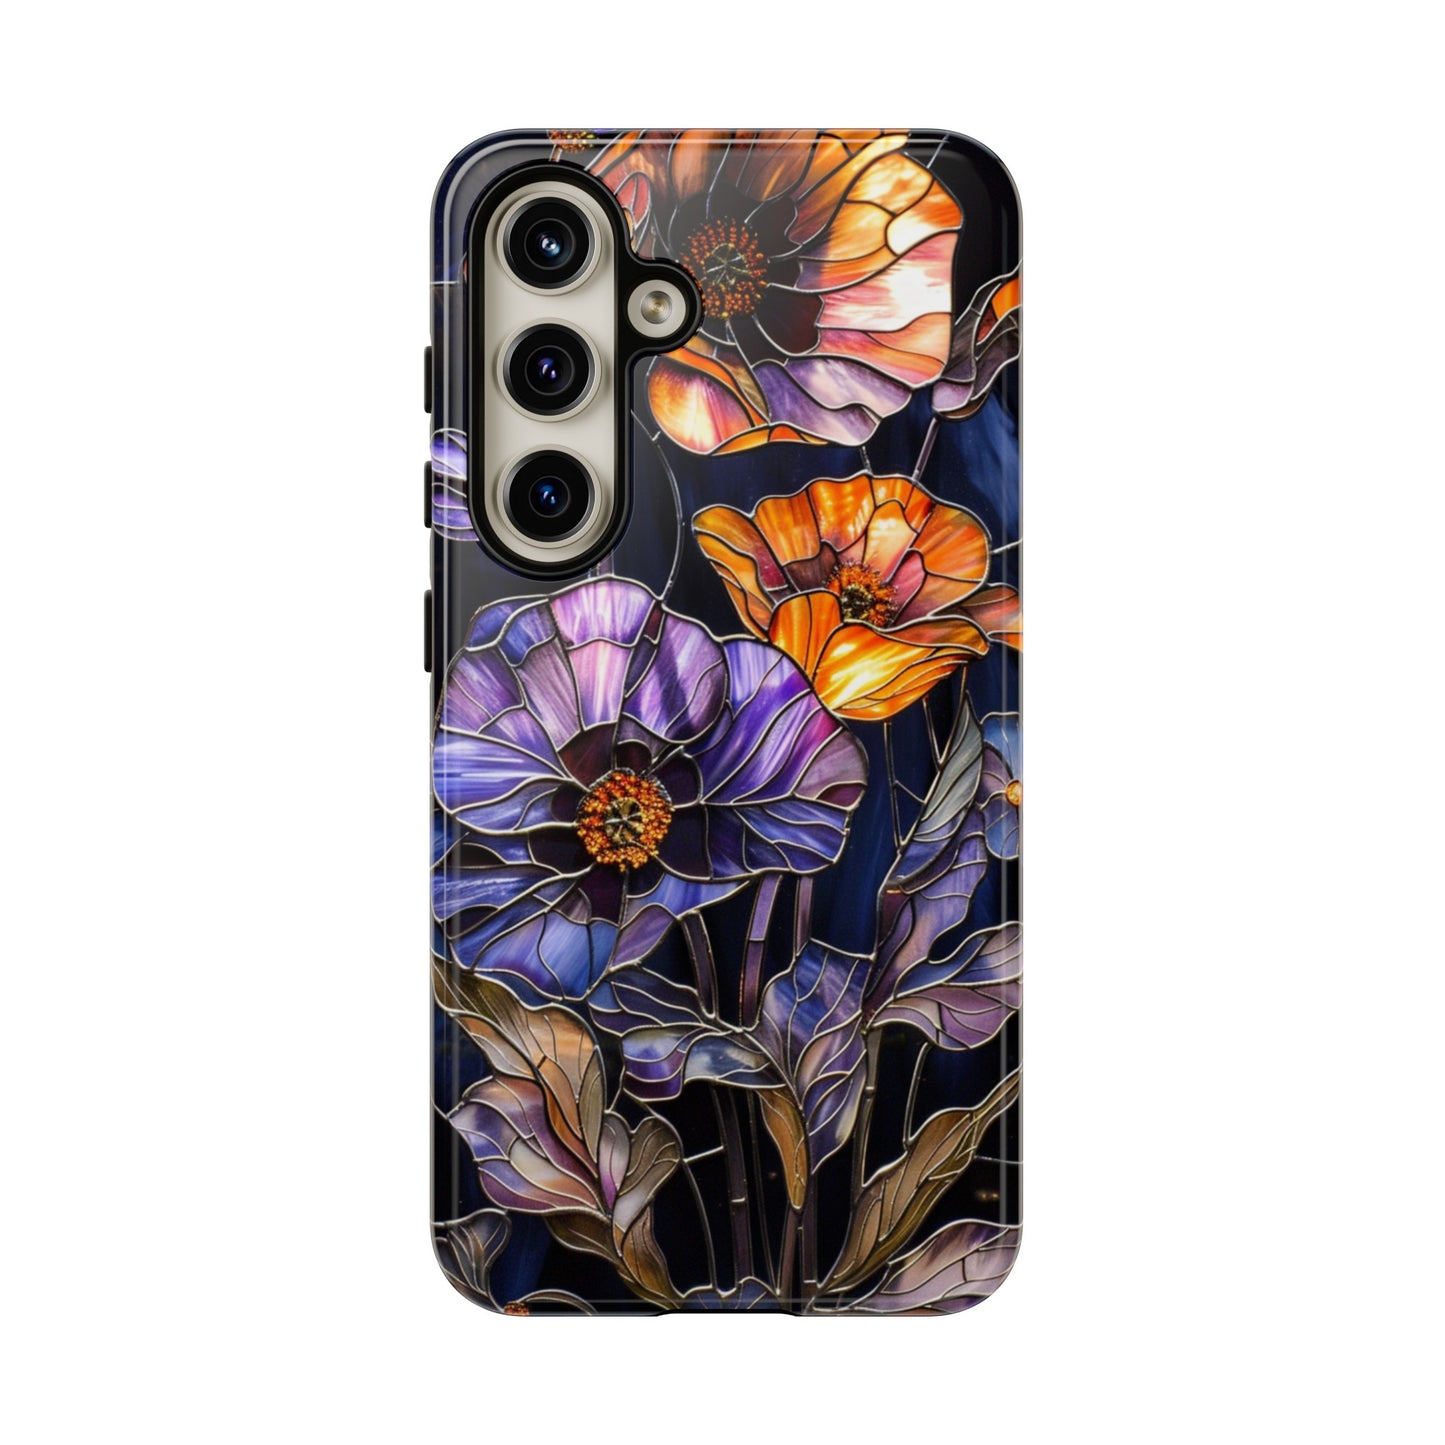 Night blossom phone case for iPhone 15 with stained glass design